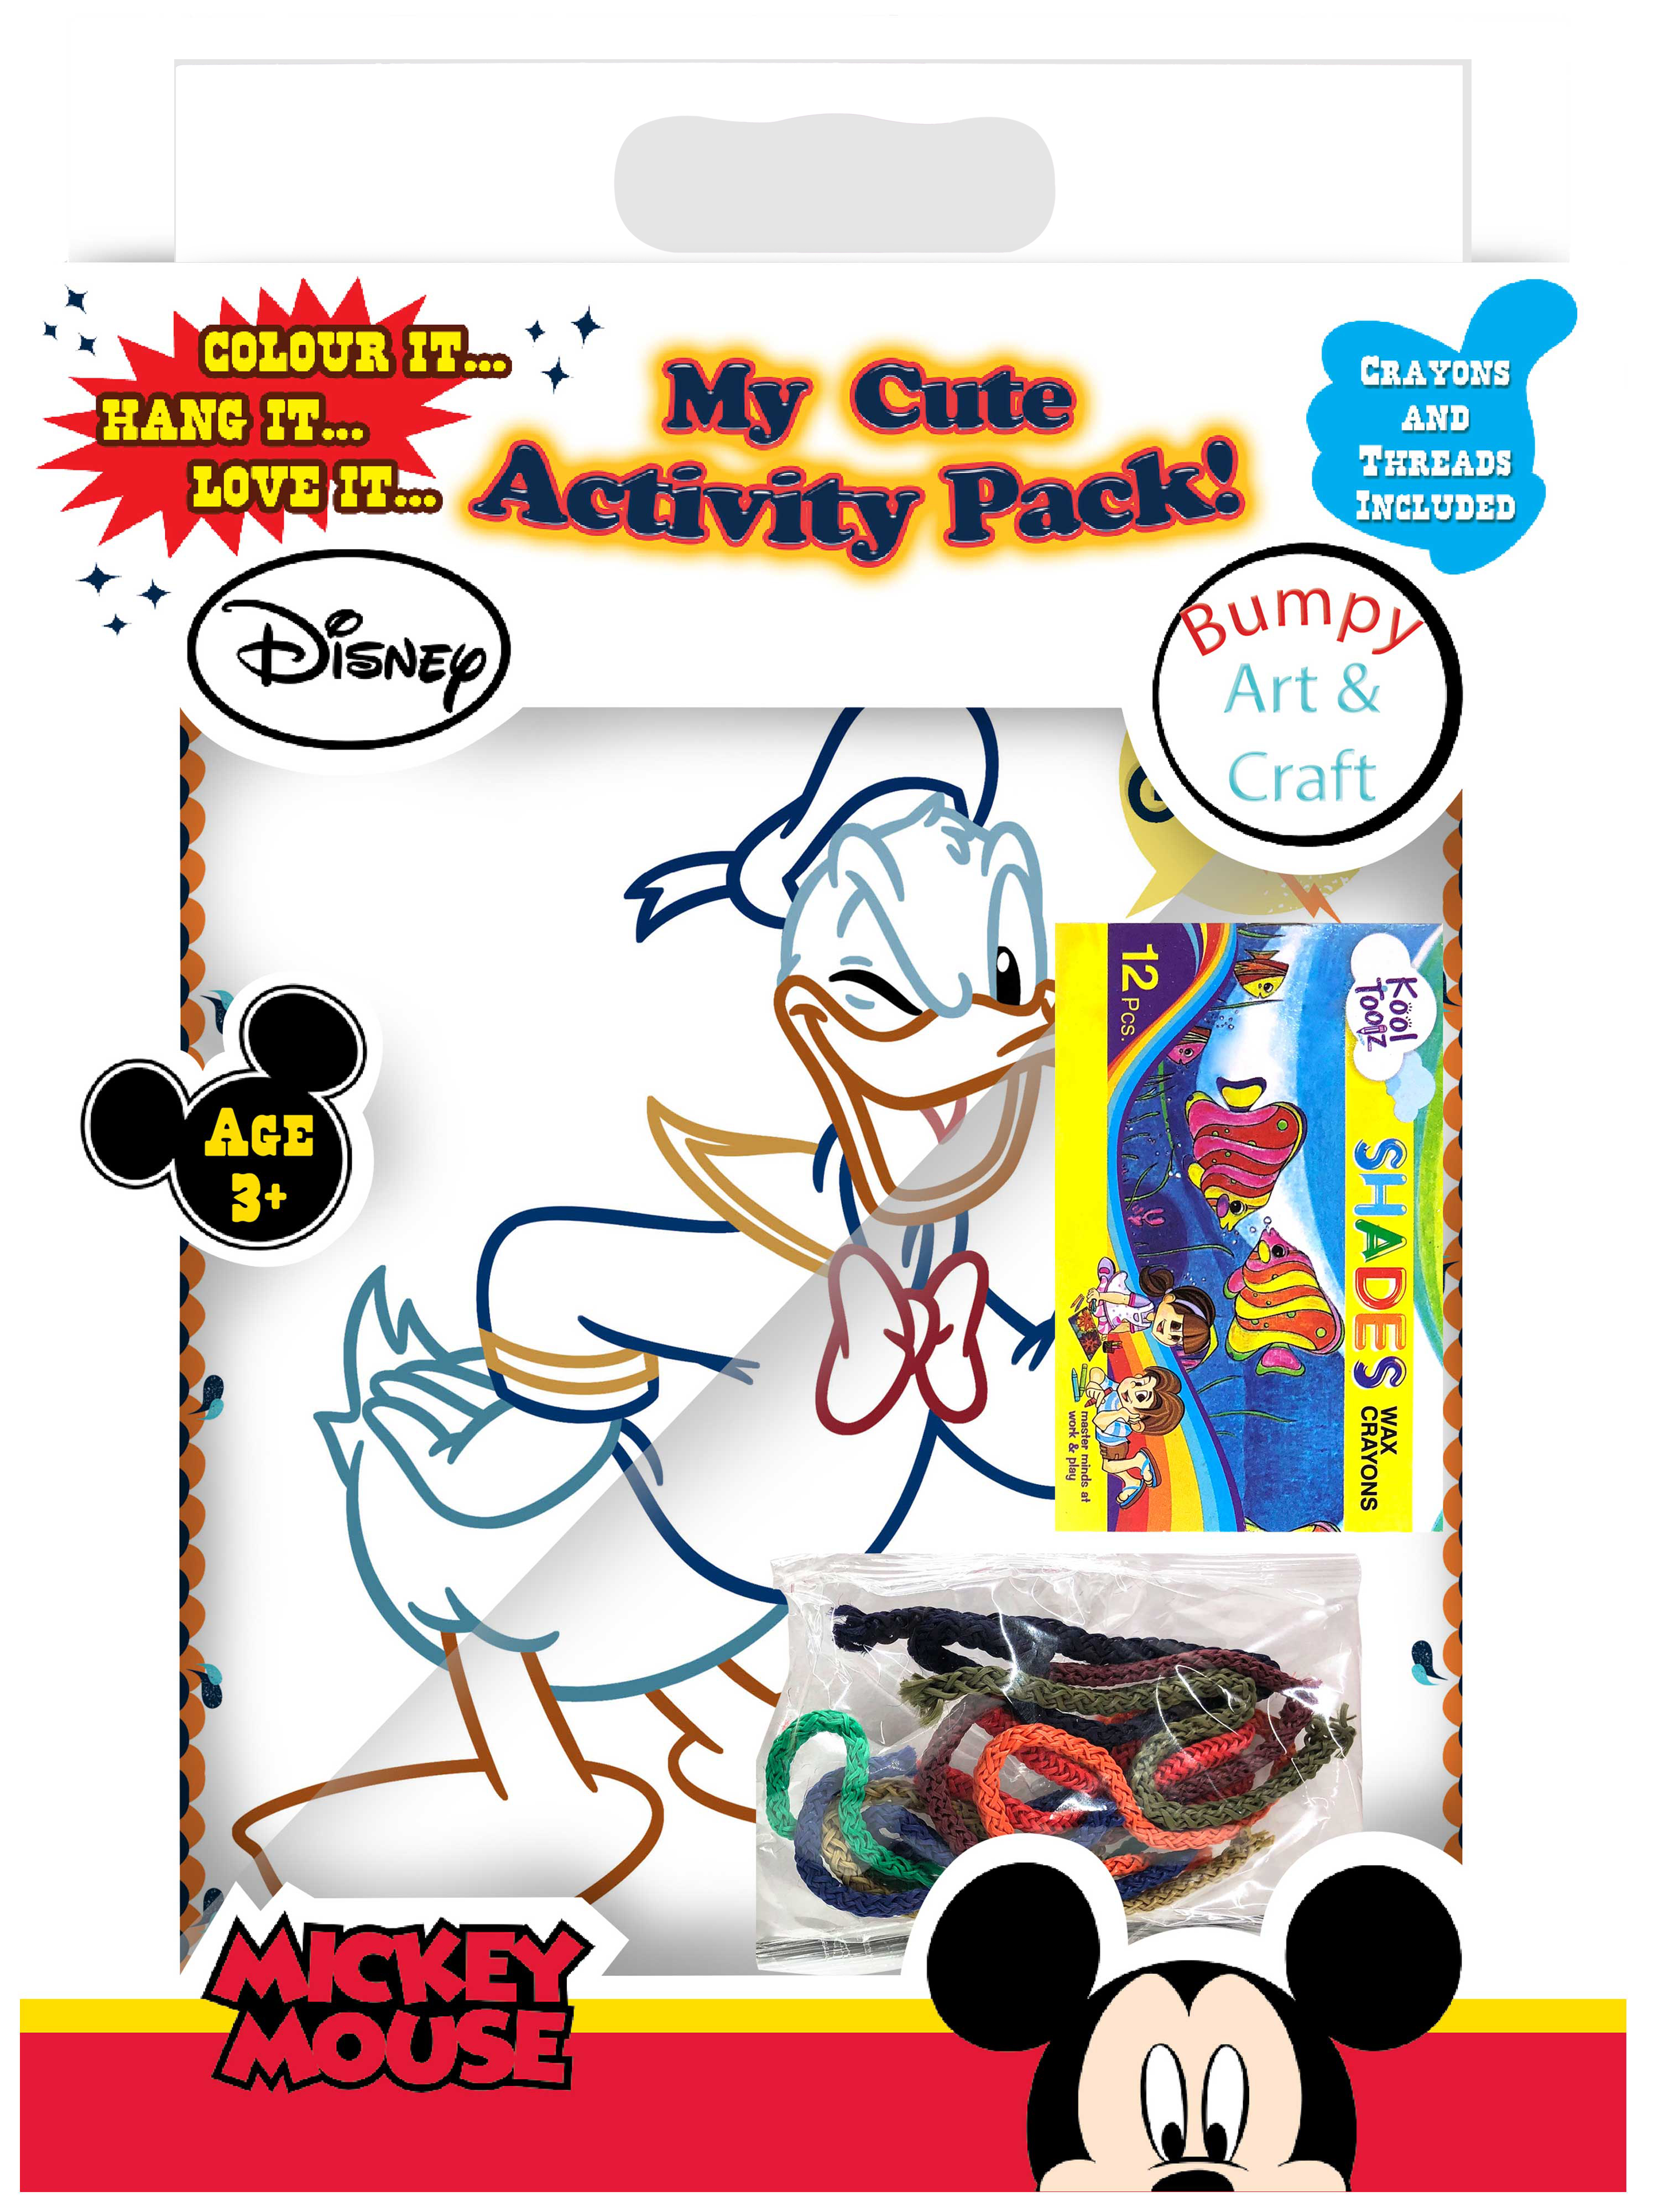 My Cute Activity Pack! Micky Mouse Bumpy